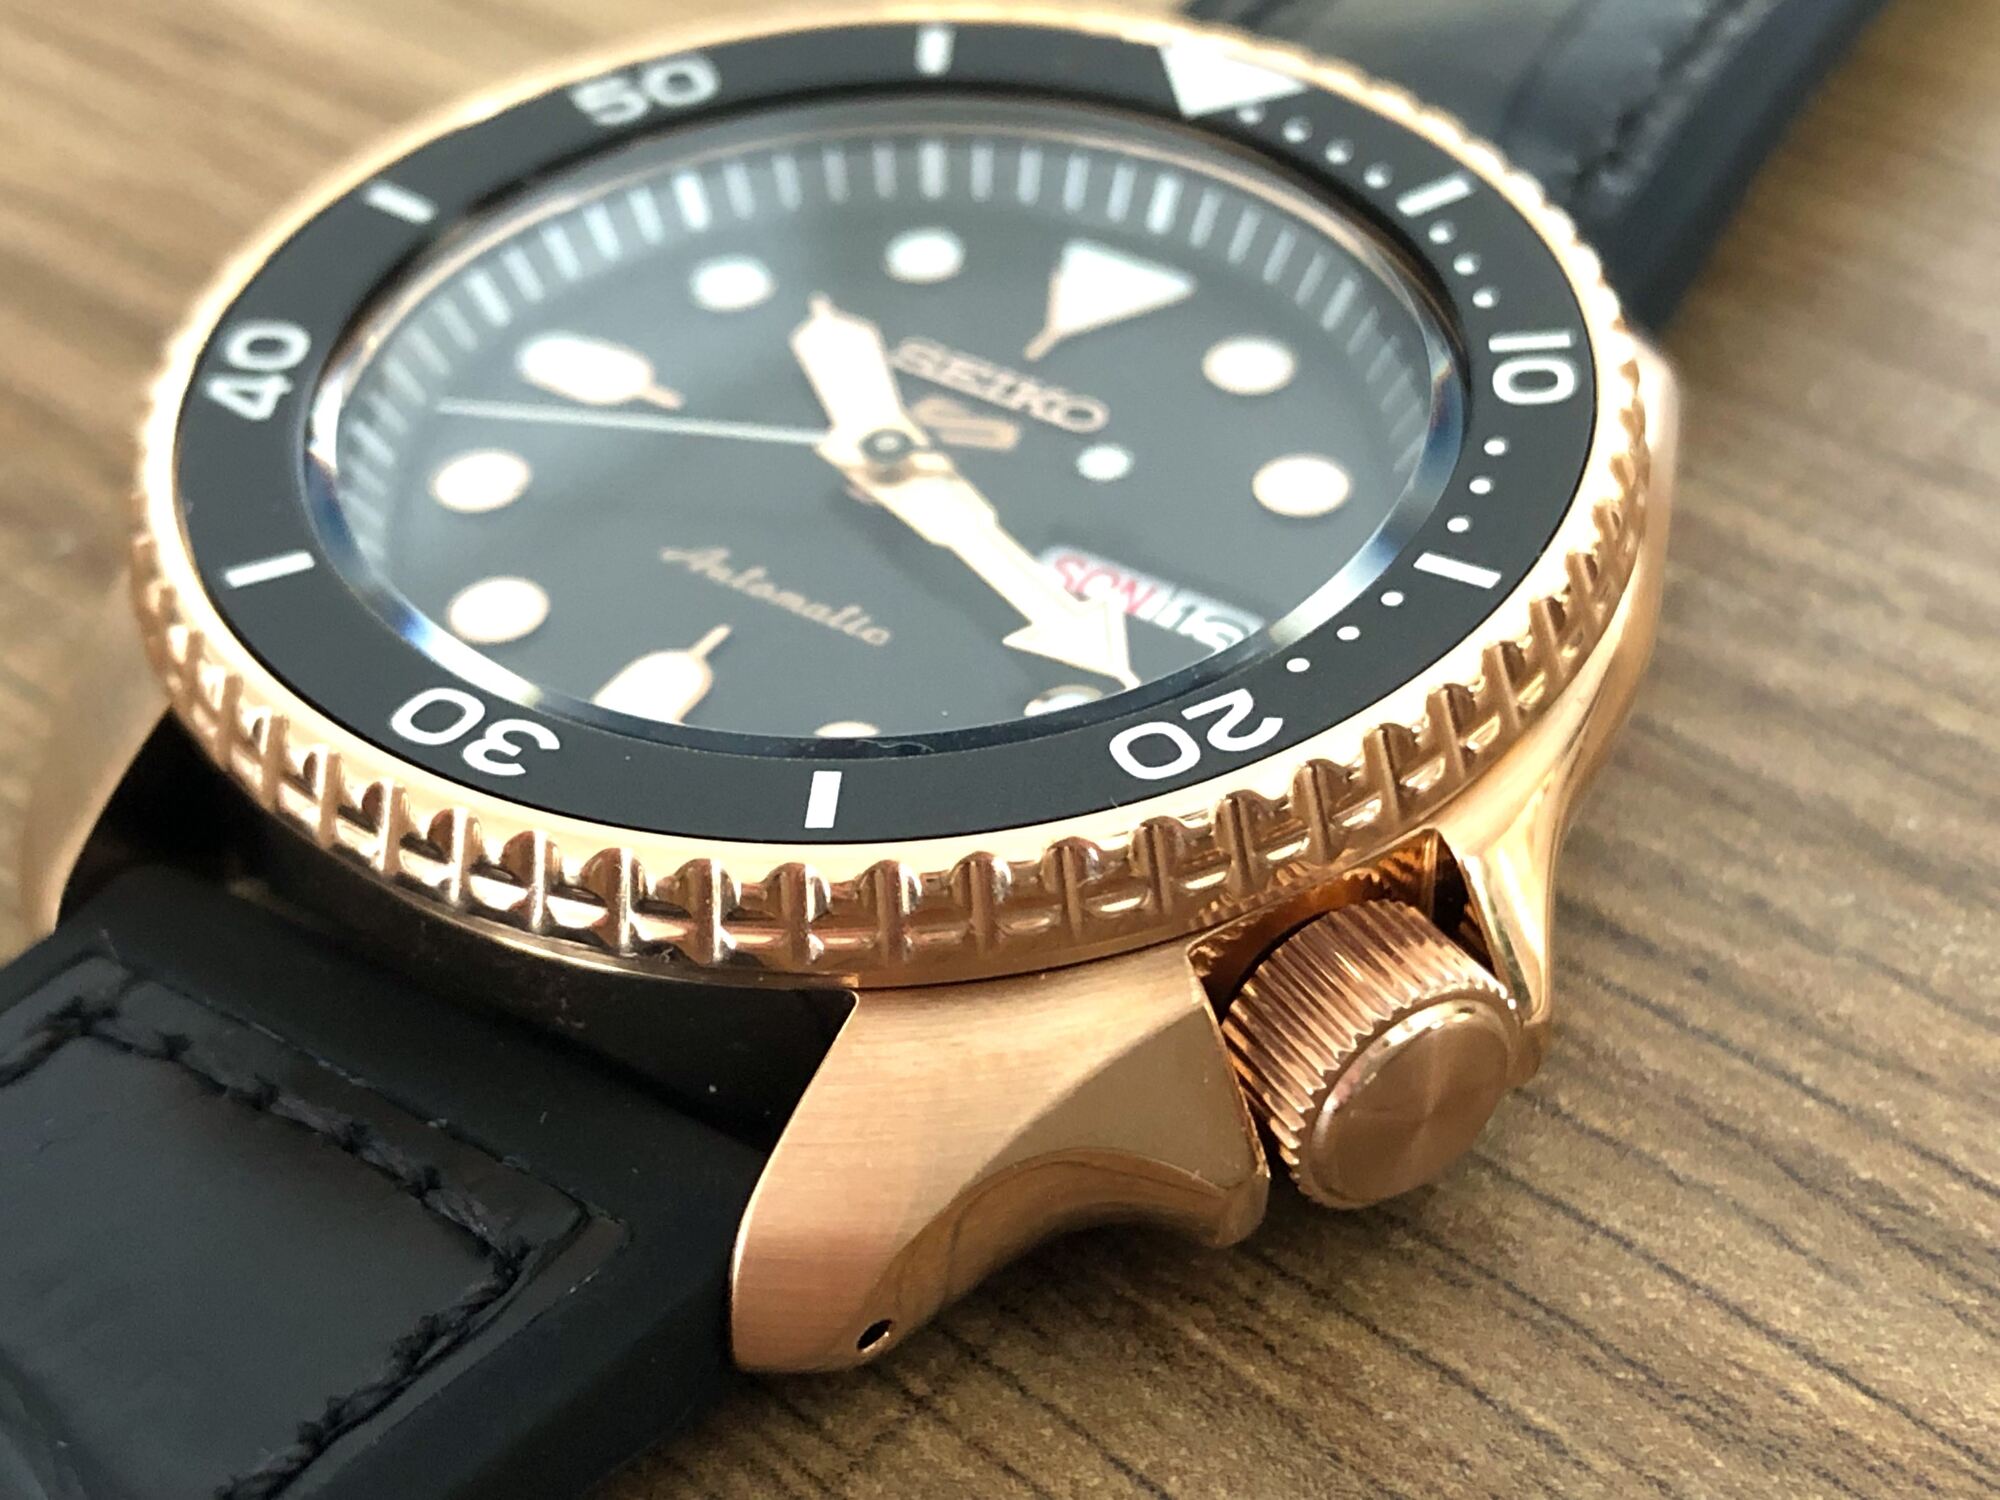 Rose-gold tone case with black dial and crown